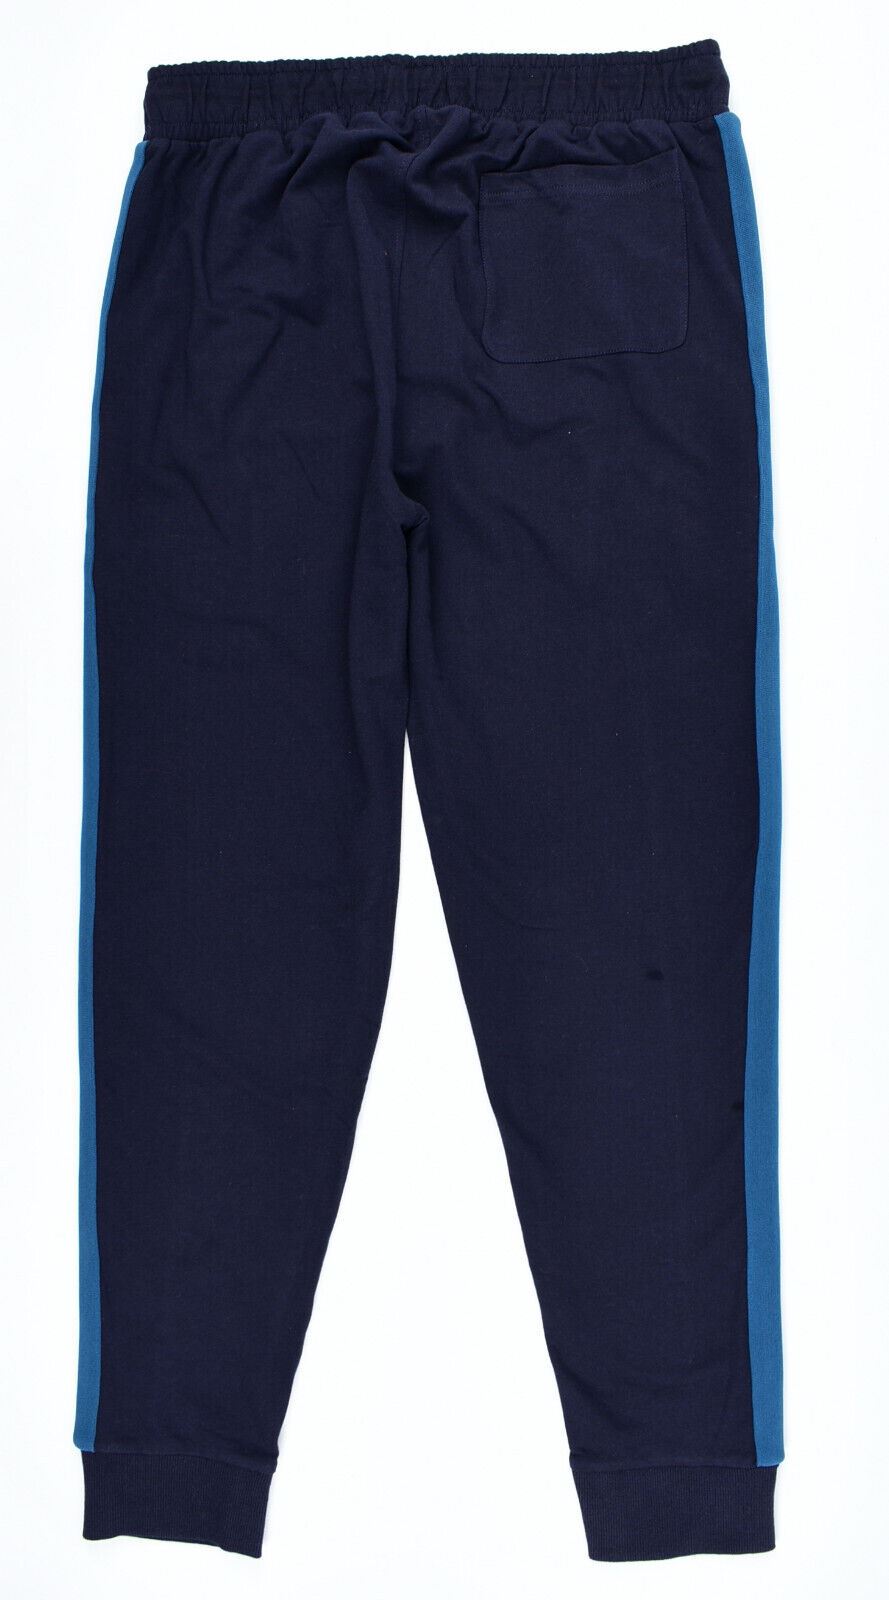 TED BAKER Men's French Terry Joggers, Lounging Pants, Navy Blue, Ted size 2 /S